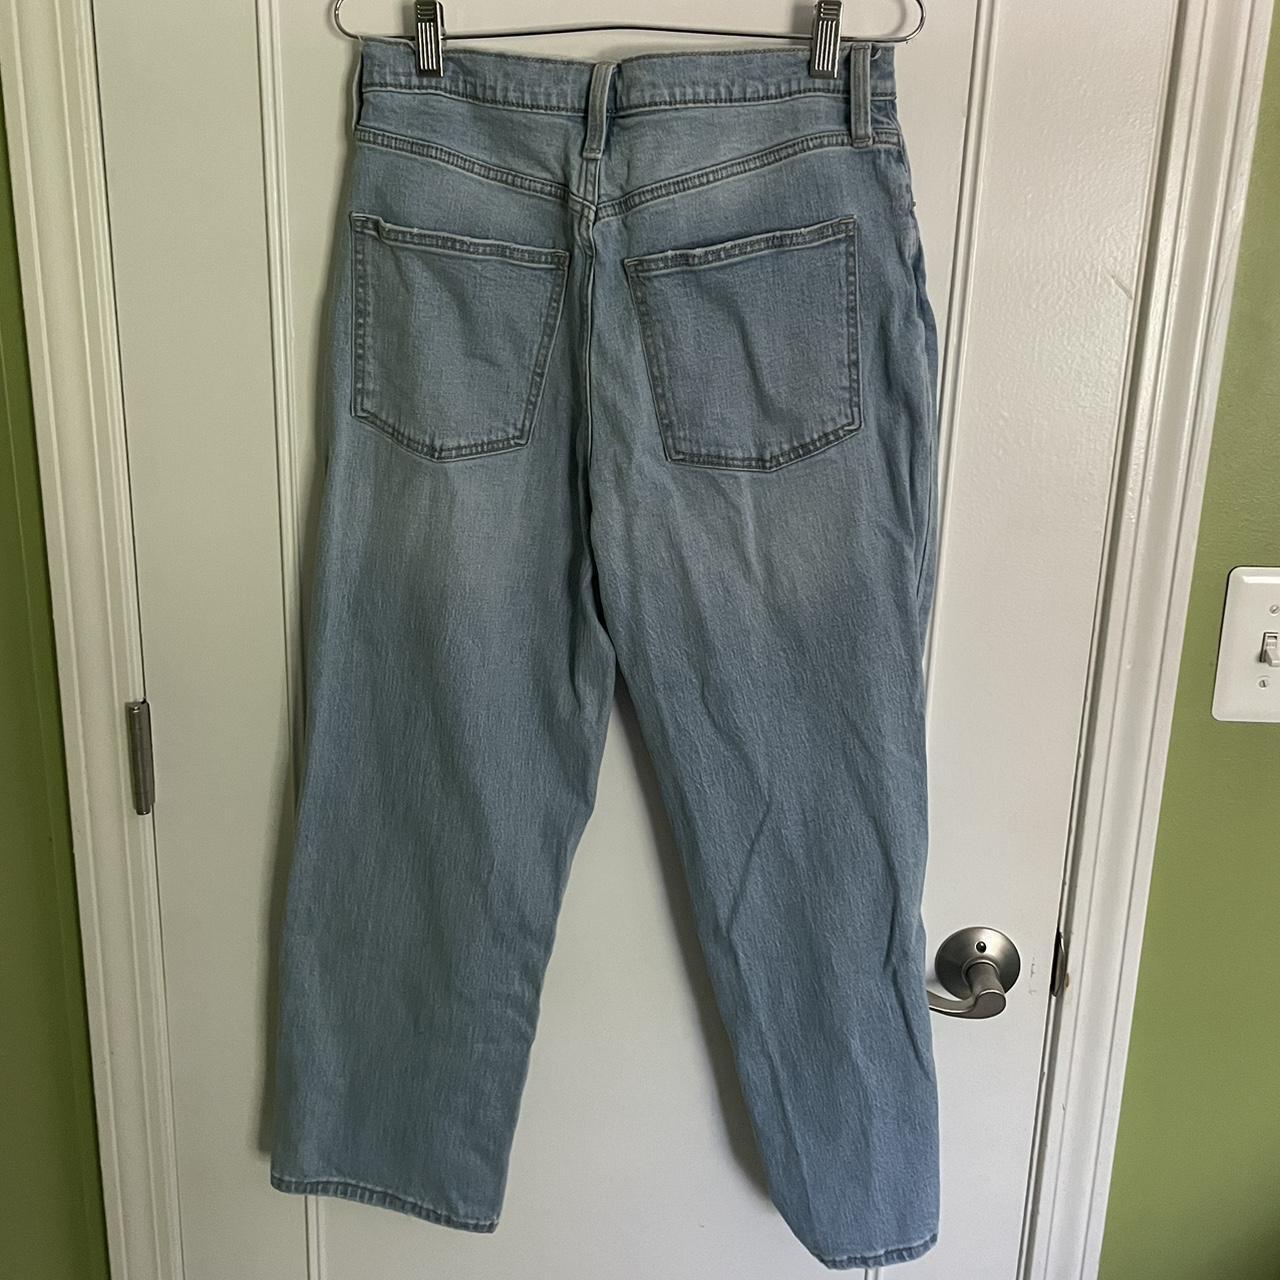 Target curvy mom jeans size 12! Great condition - Depop